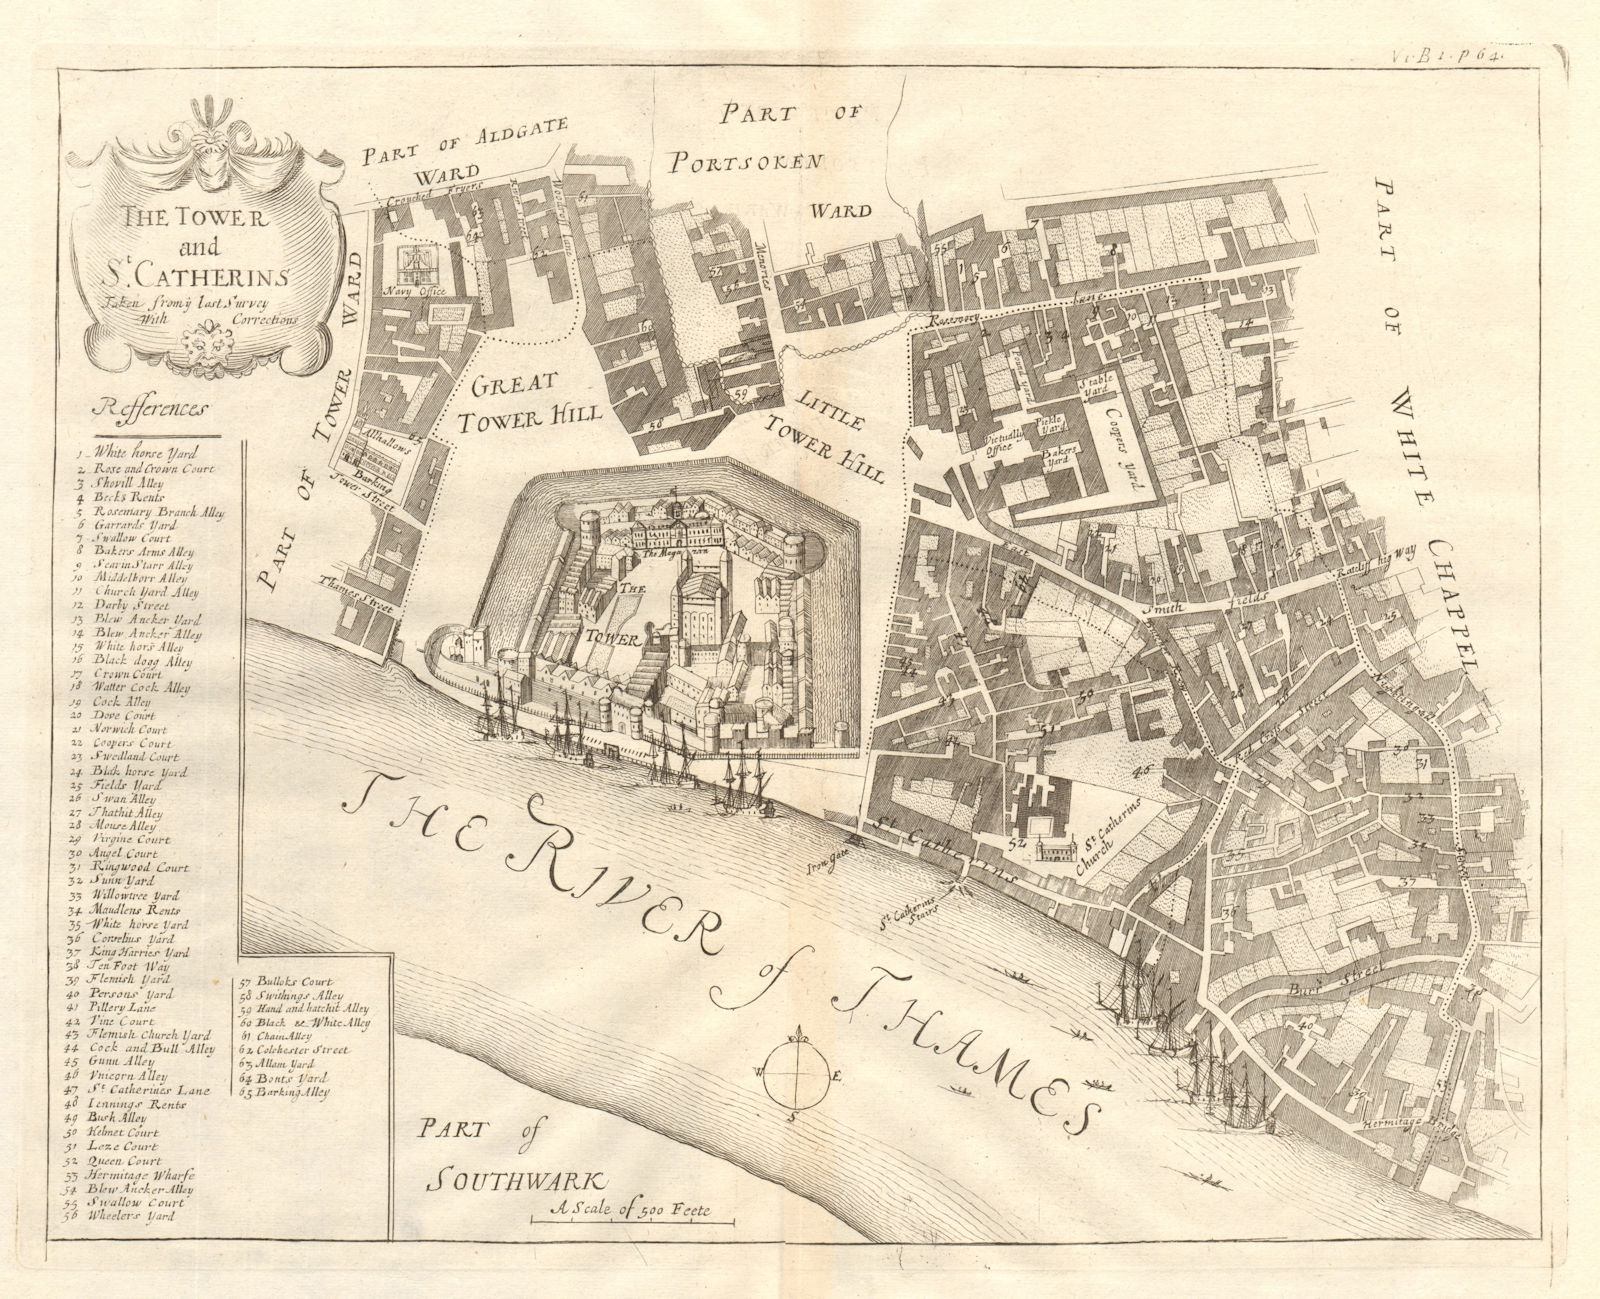 'The Tower [of London] & St Catherin's'. St Katherine's STOW/STRYPE 1720 map